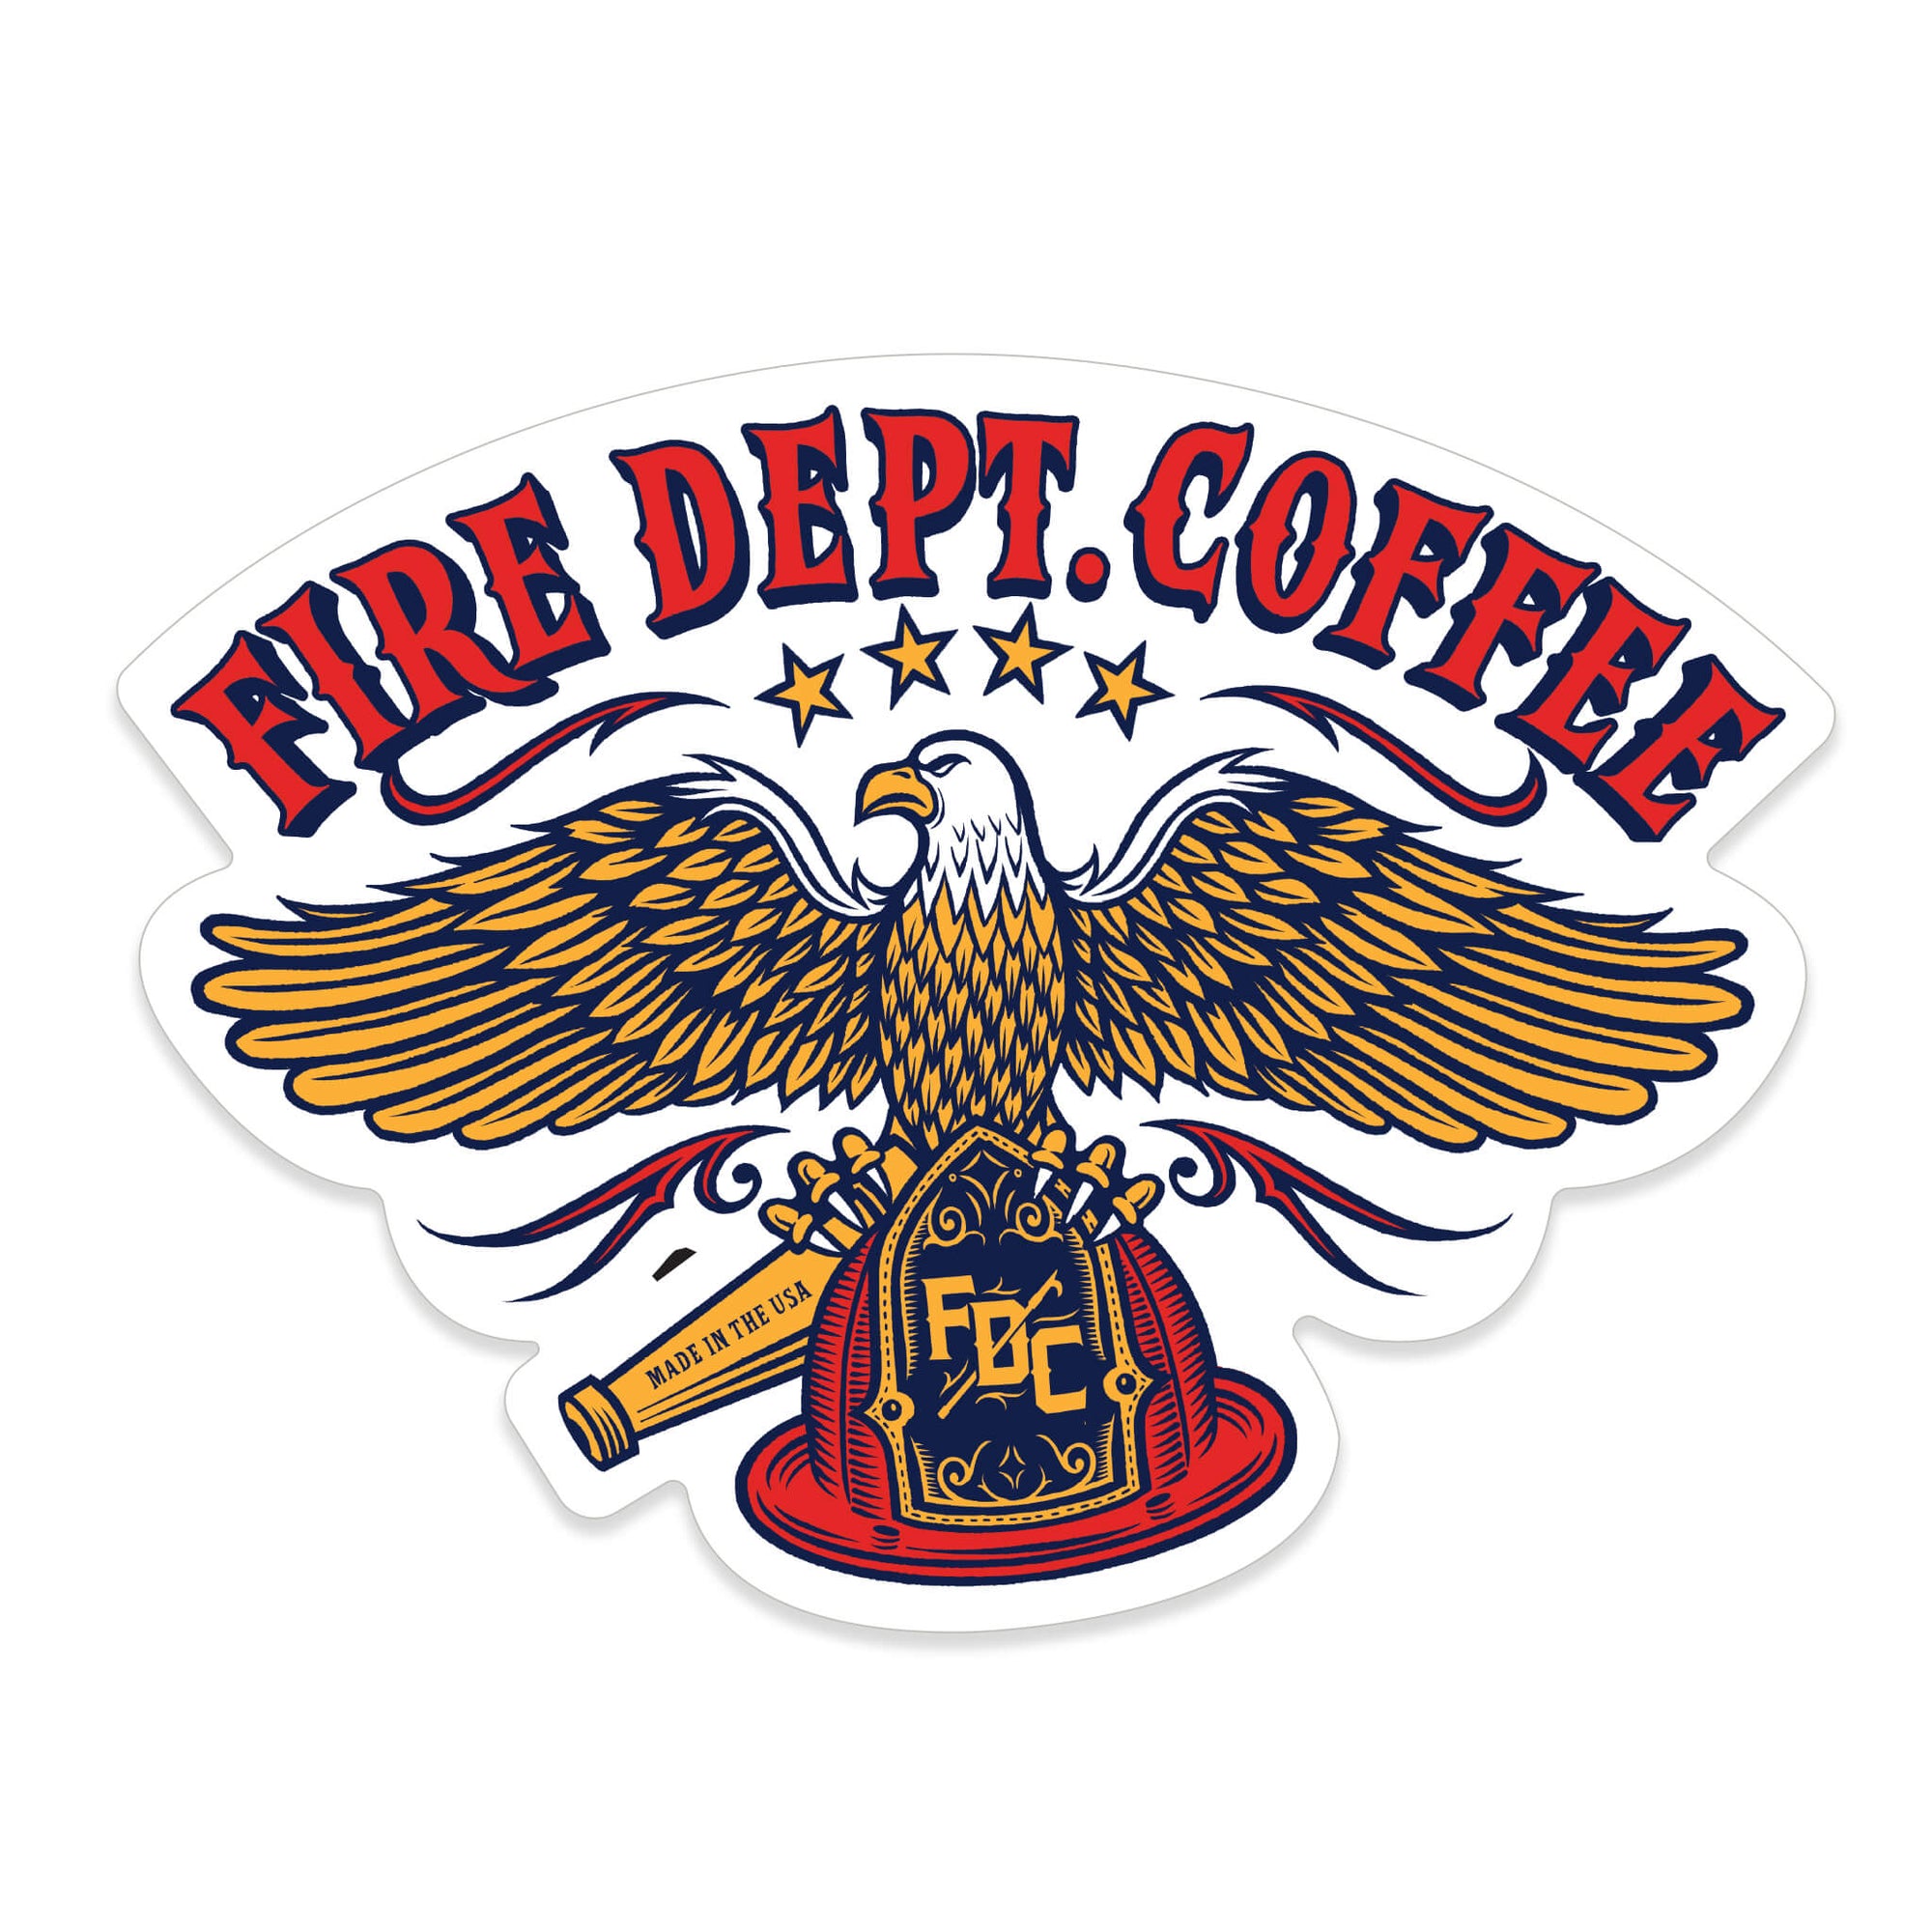 A sticker with an illustration of an eagle holding an FDC fire helmet. Above the eagle is red text that reads "Fire Dept. Coffee"